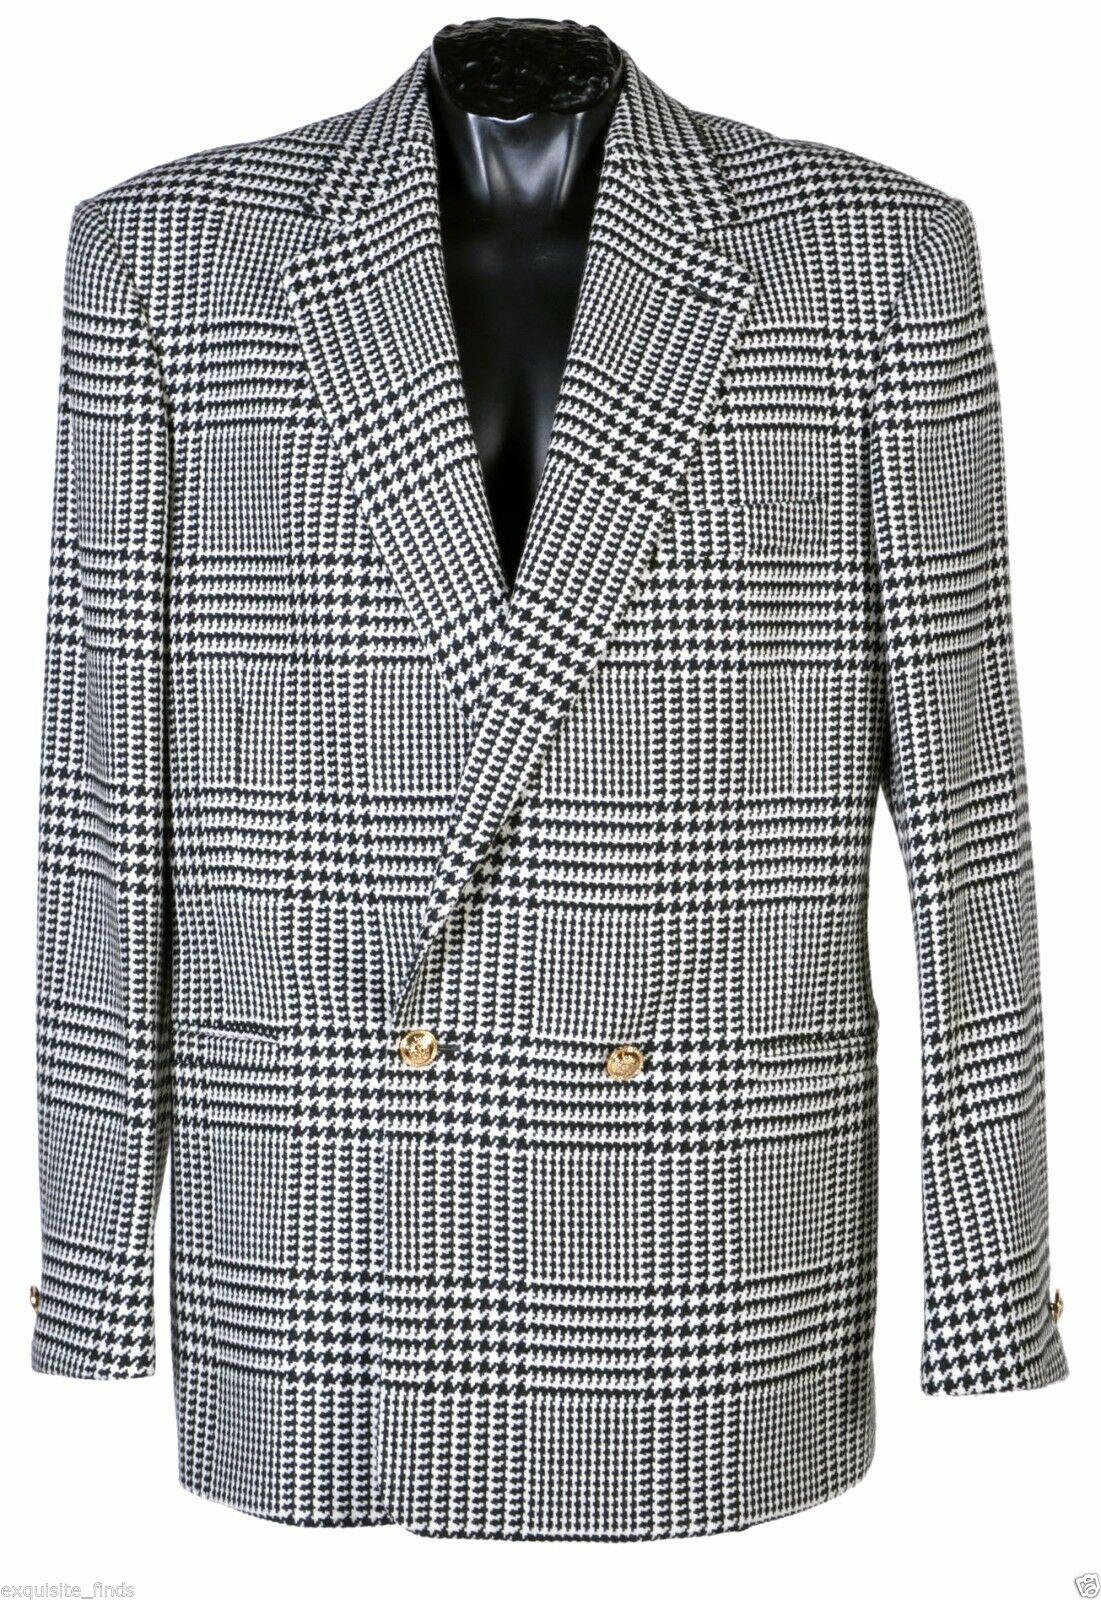 VERSACE  MEN'S SUIT

TAILOR MADE
95% wool, 5% cashmere
The jacket features: double-breasted Italian design, two side pockets, one chest pocket, one button sleeves and 3 inner finished pockets.  
Medusa lining
 
Medusa buttons

Italian size 56 - US